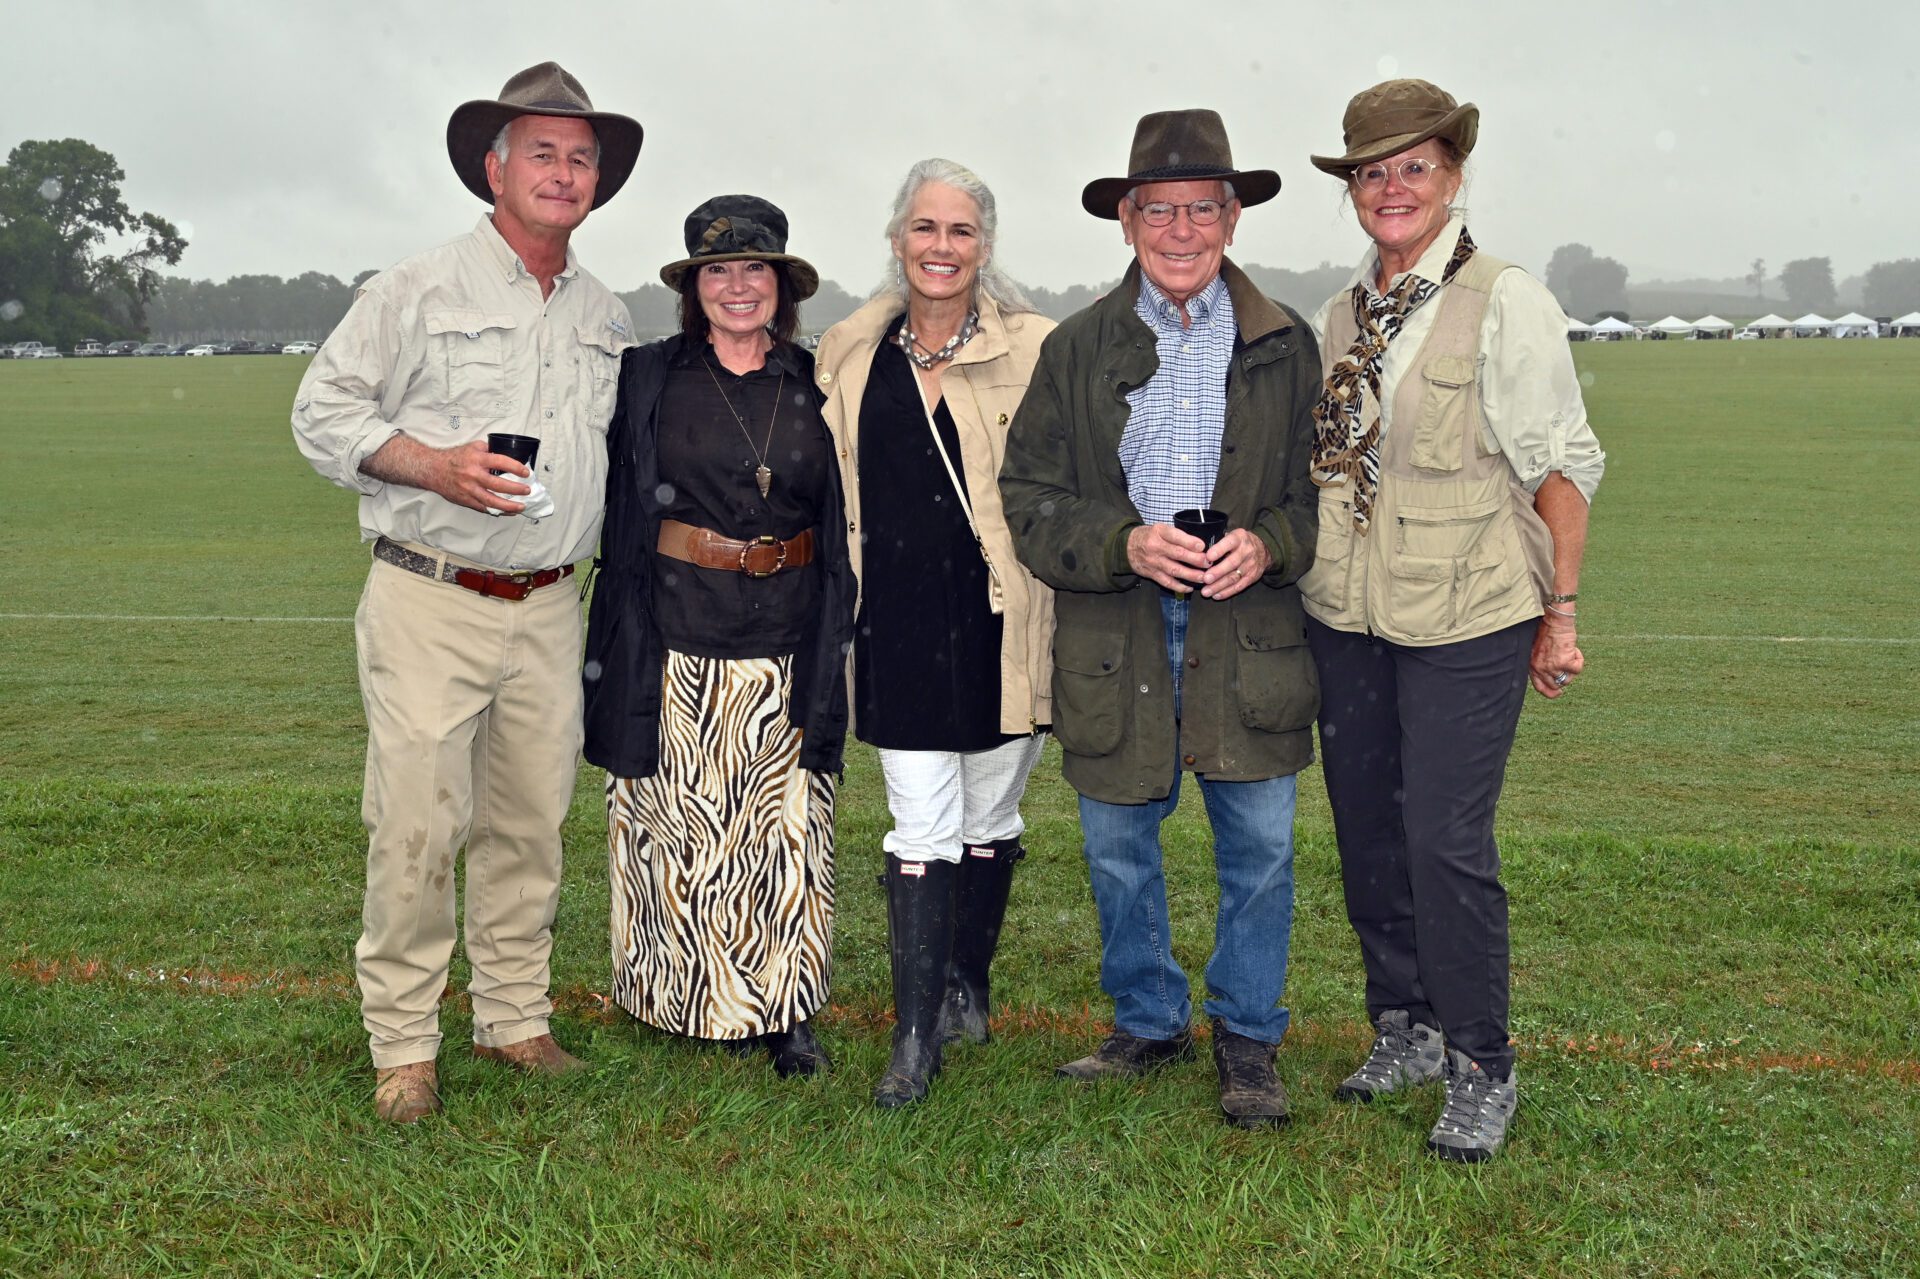 Chukkers for Charity Event in Franklin, TN_Mark & LaDonna McMillan, Charlie and Dana Burke